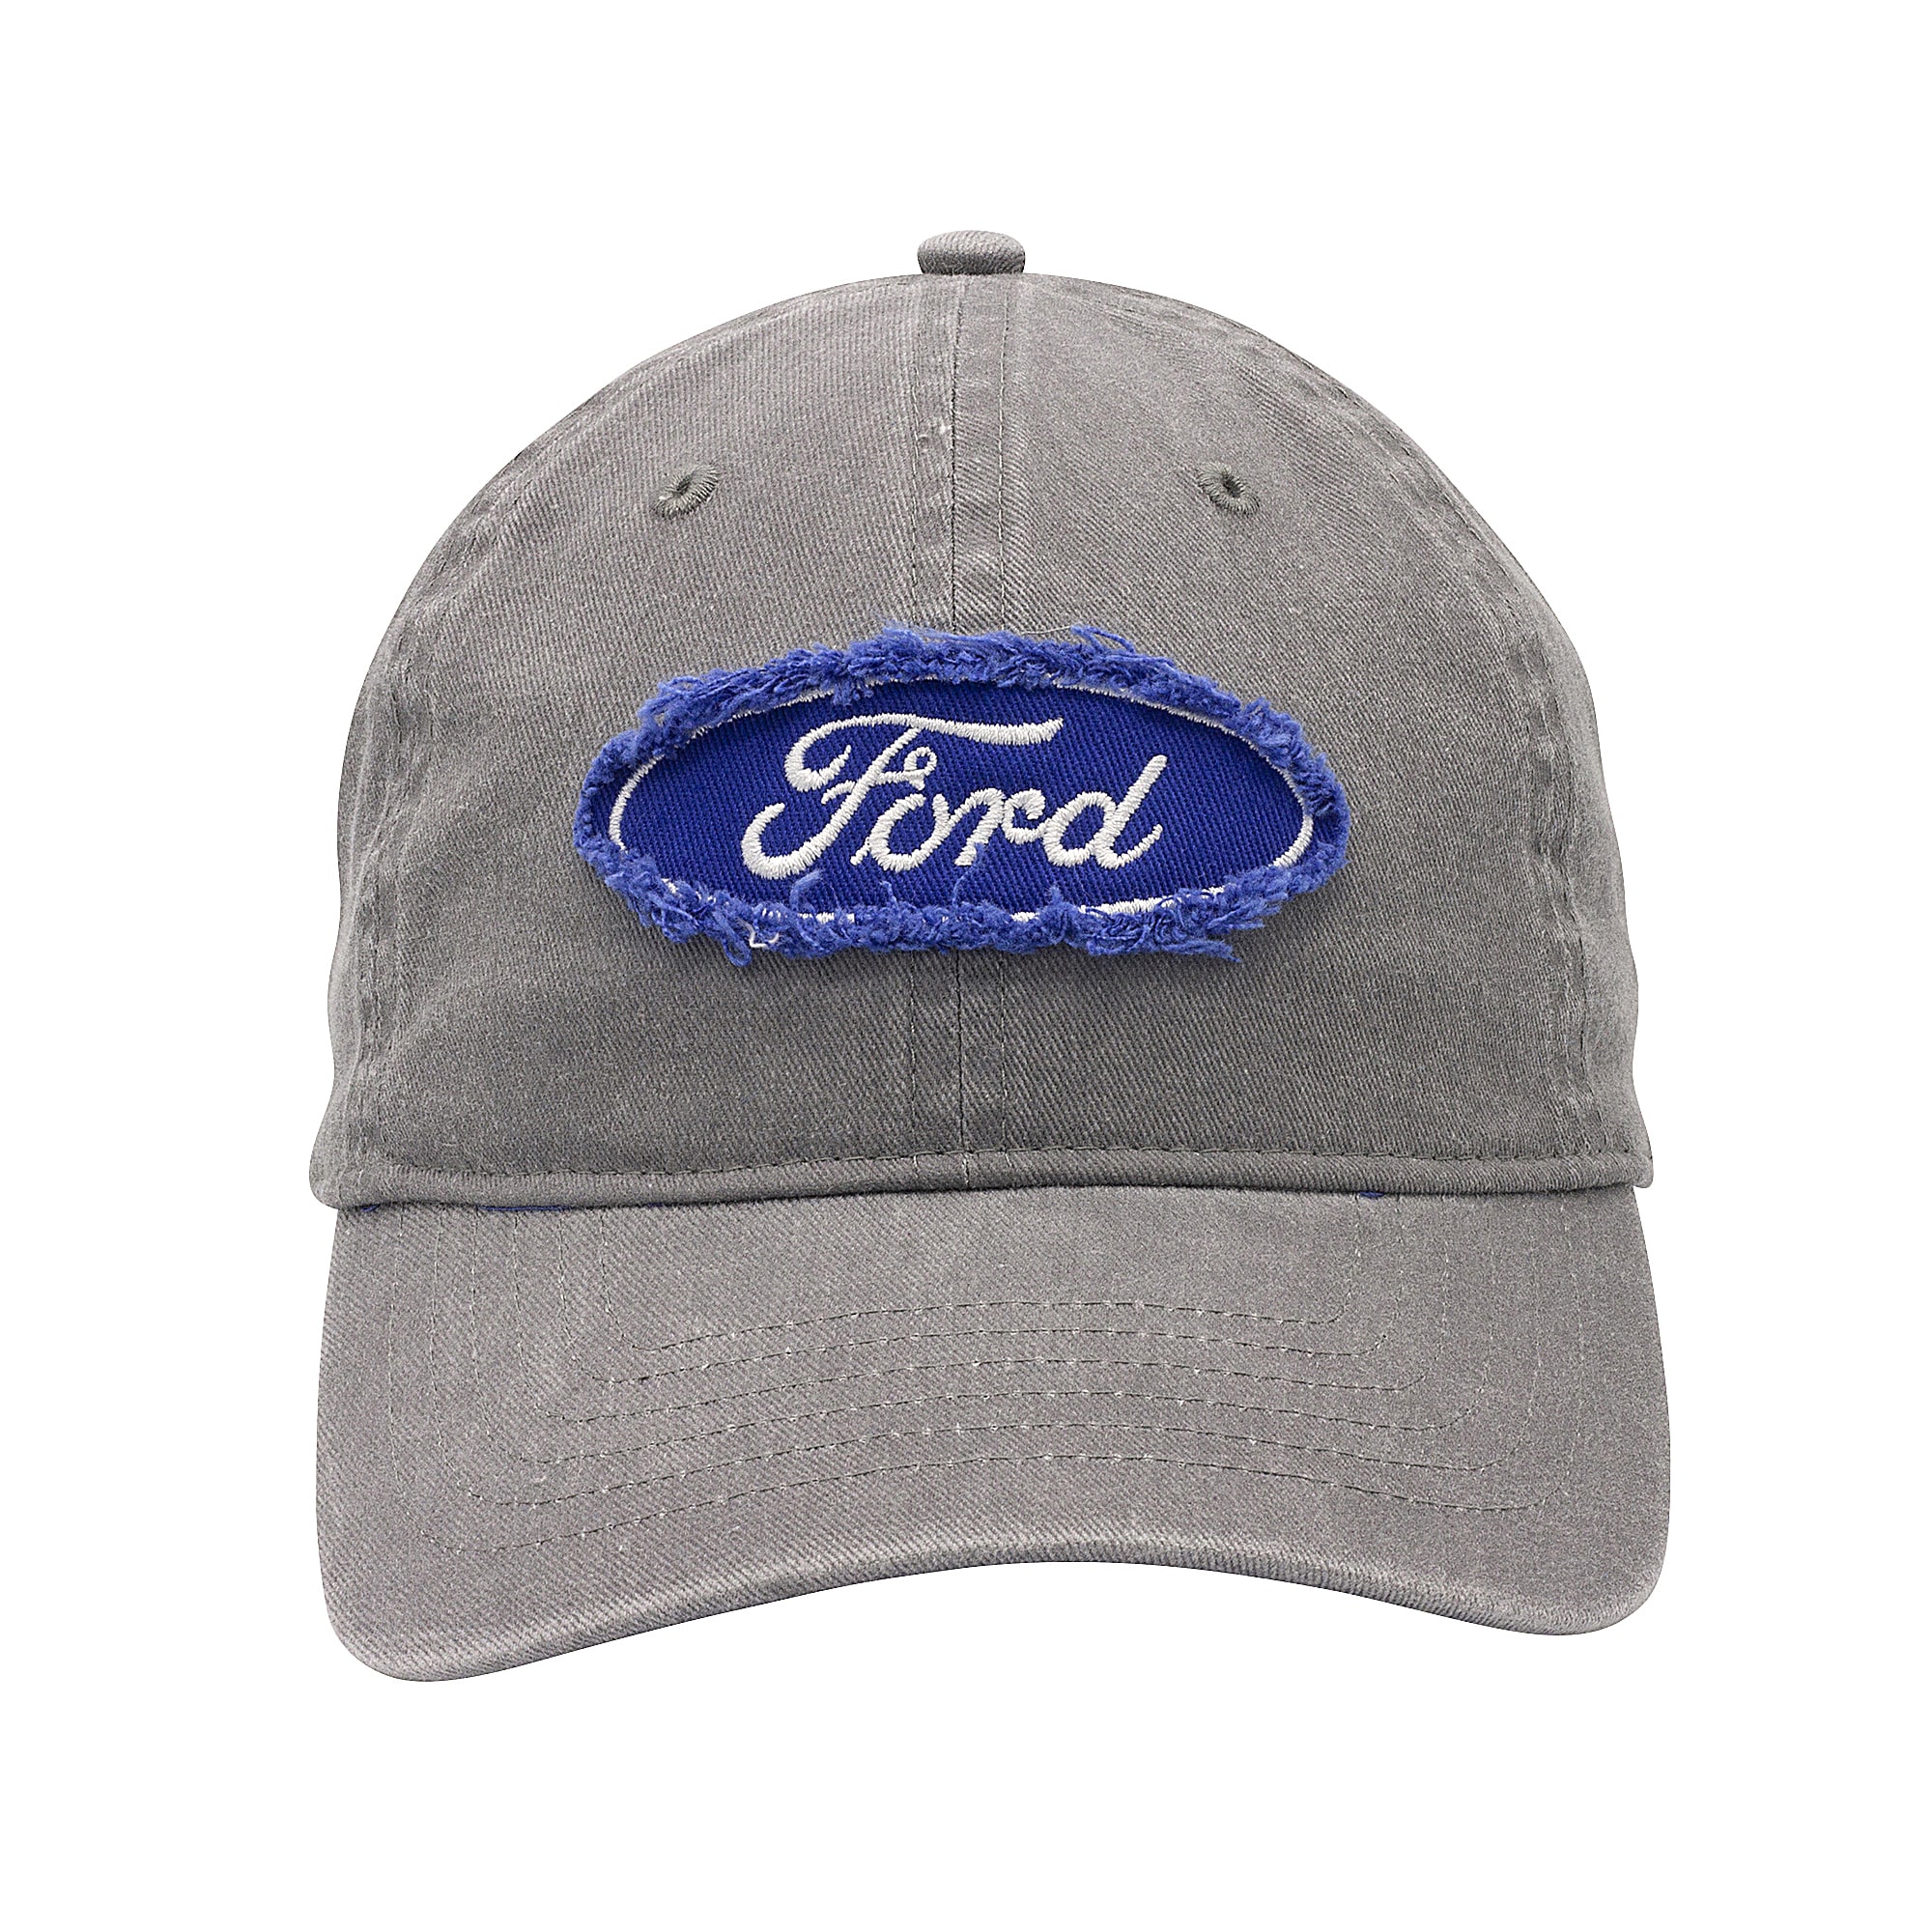 FORD Logo Patch Black Hat Adjustable Curved Bill Baseball Cap Outdoor Cap 